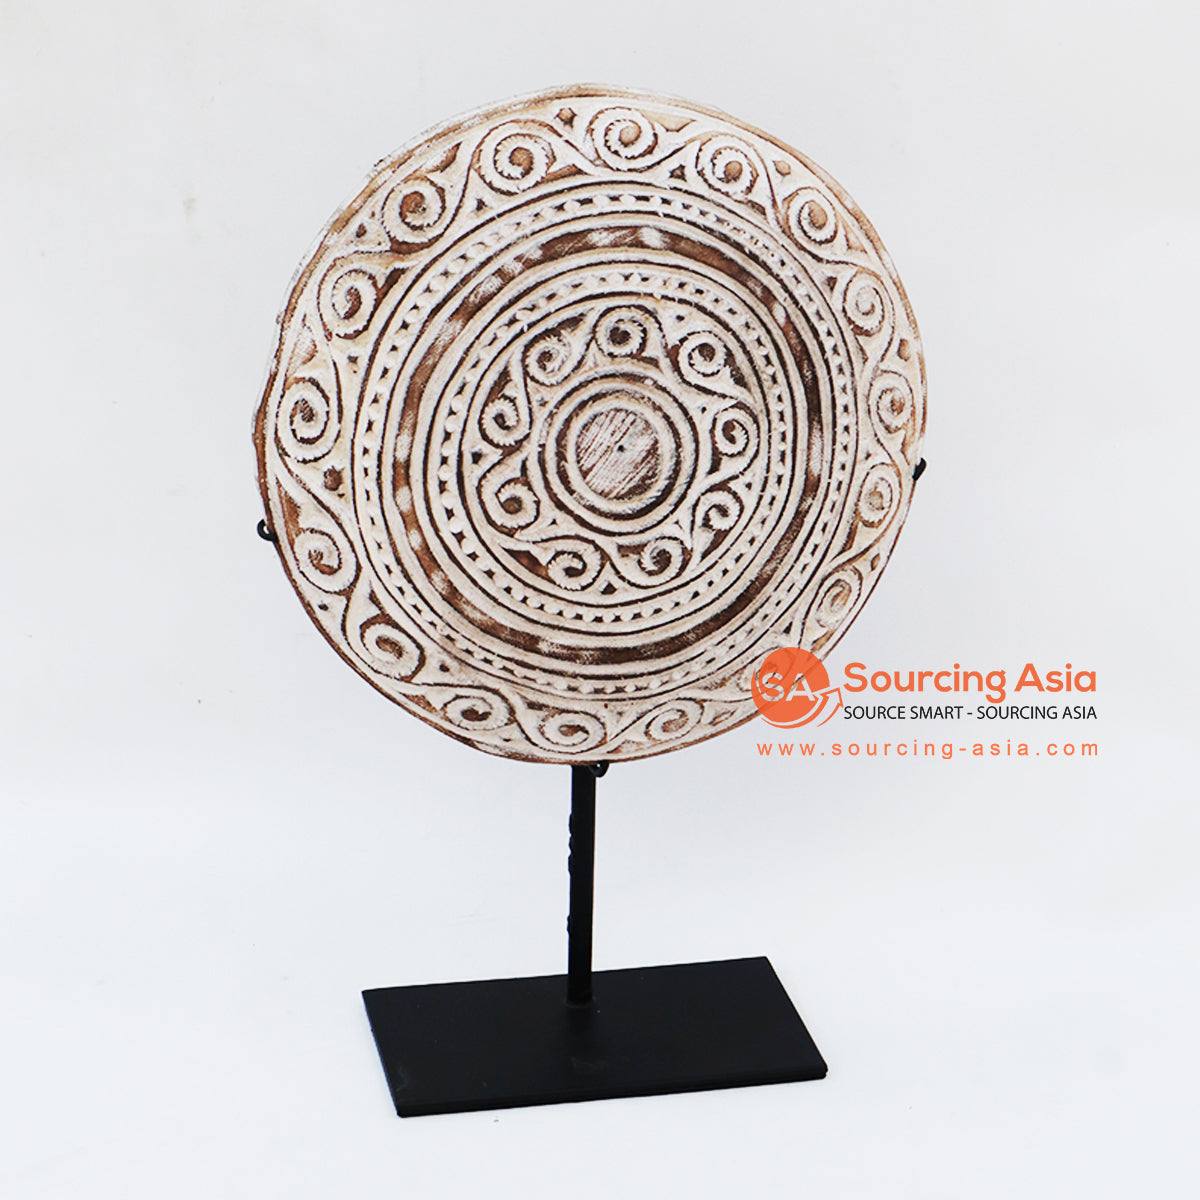 KNTC112 BROWN SUAR WOOD ROUND DISC ON STAND DECORATION WITH WHITE TRIBAL LINING